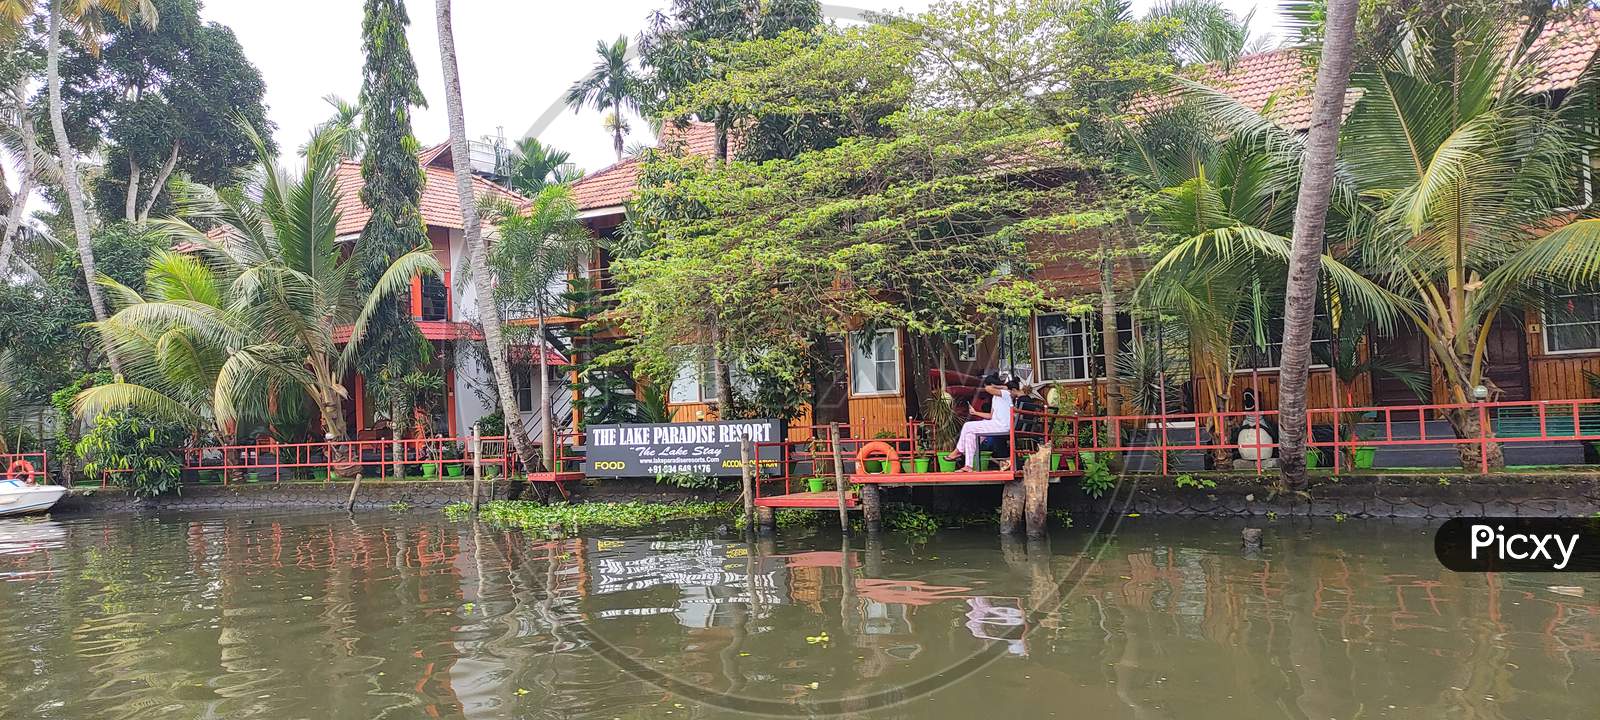 House at the end of the lake